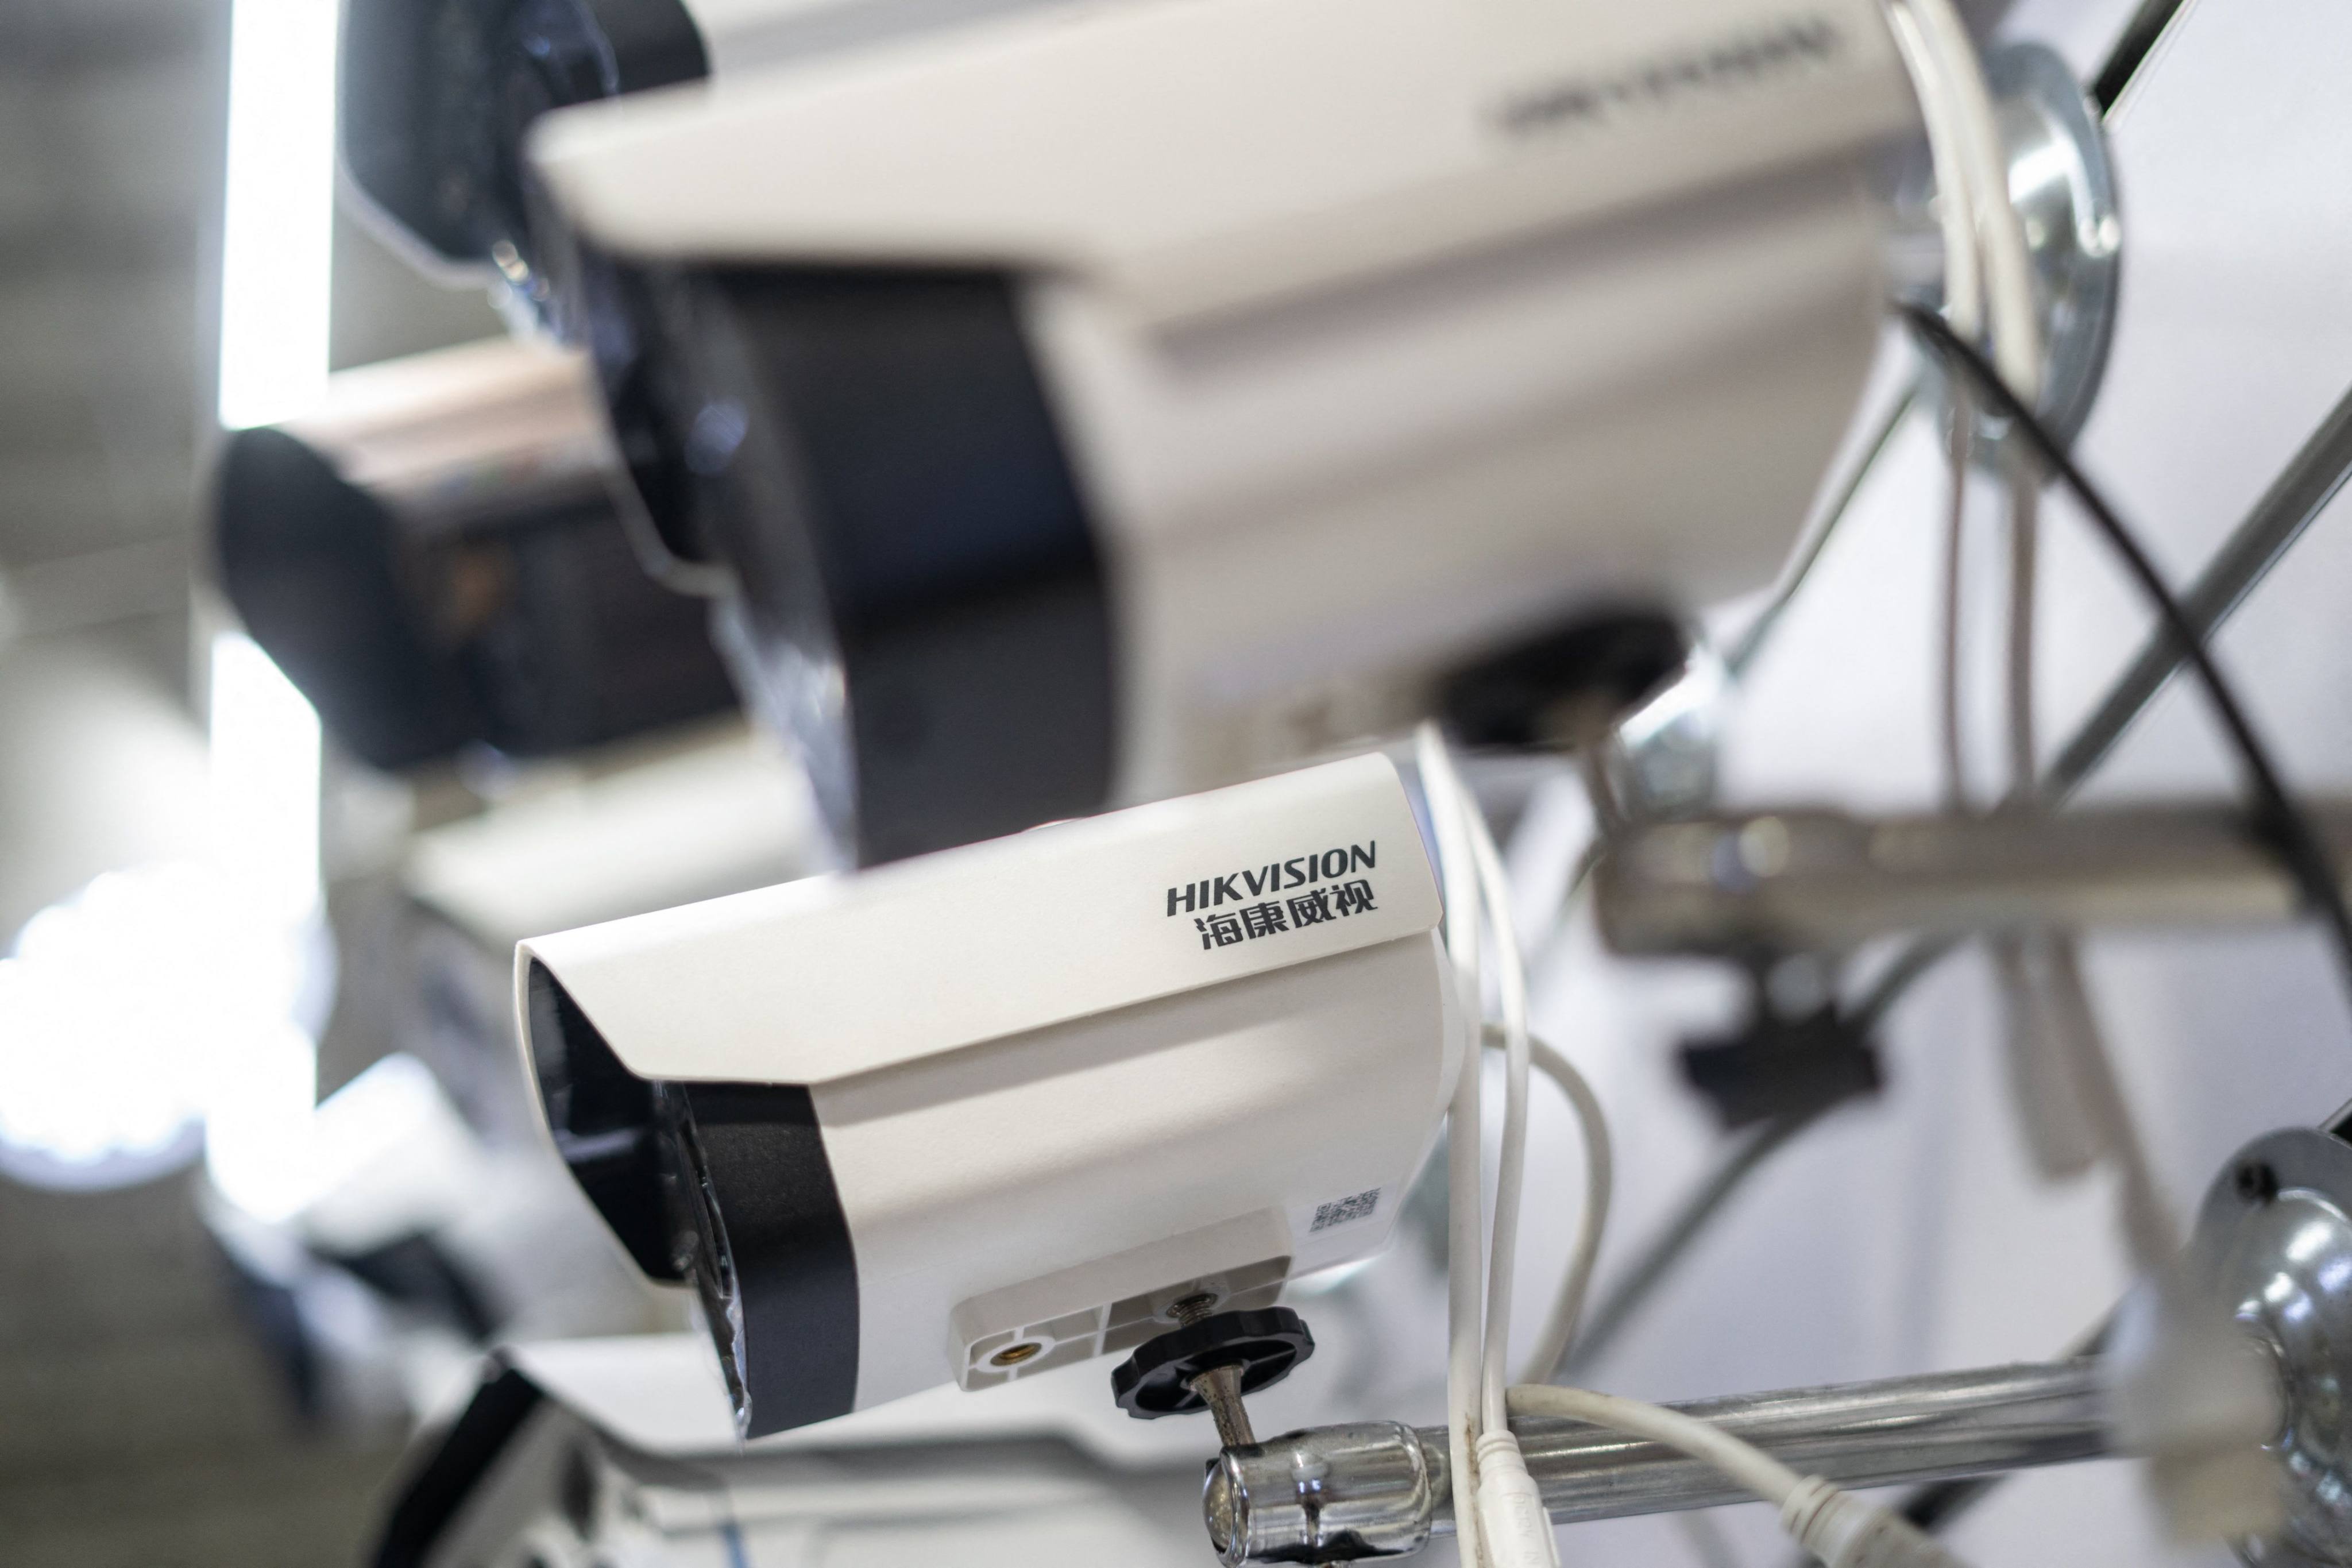 Hikvision cameras are displayed at an electronics mall in Beijing in May 2019. Photo: AFP